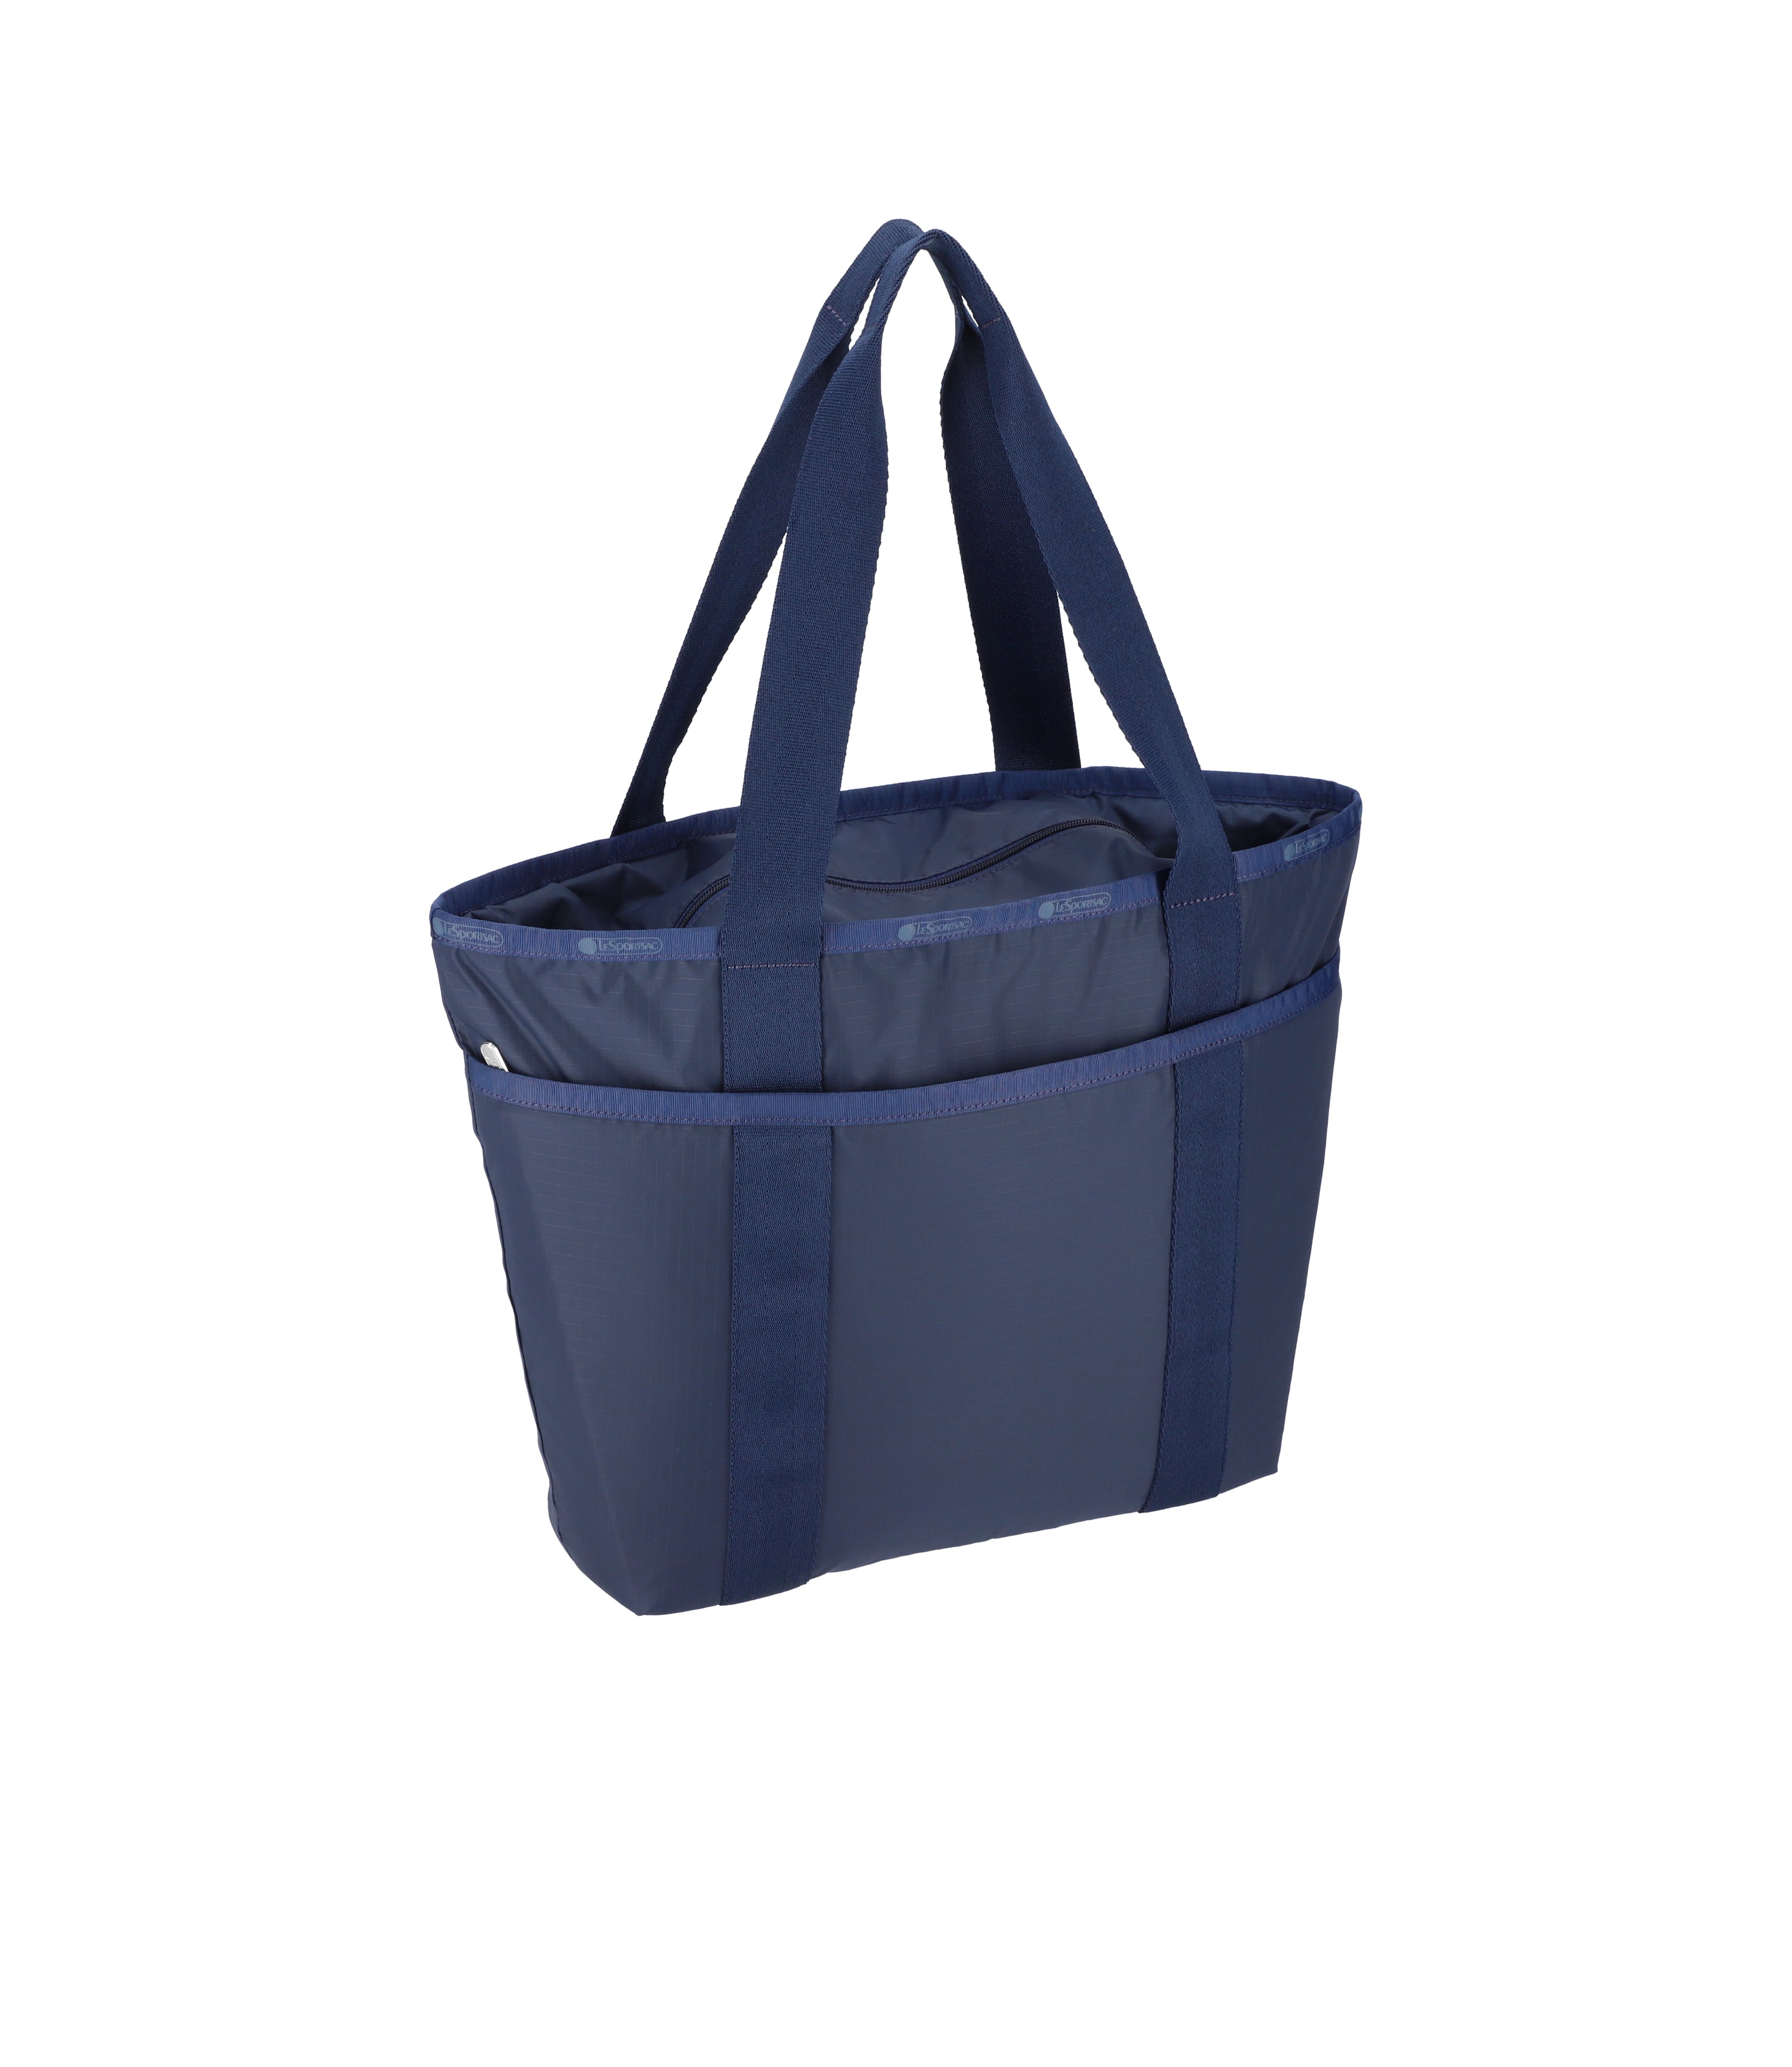 Everyday Zip Tote - Navy Blue solid – LeSportsac